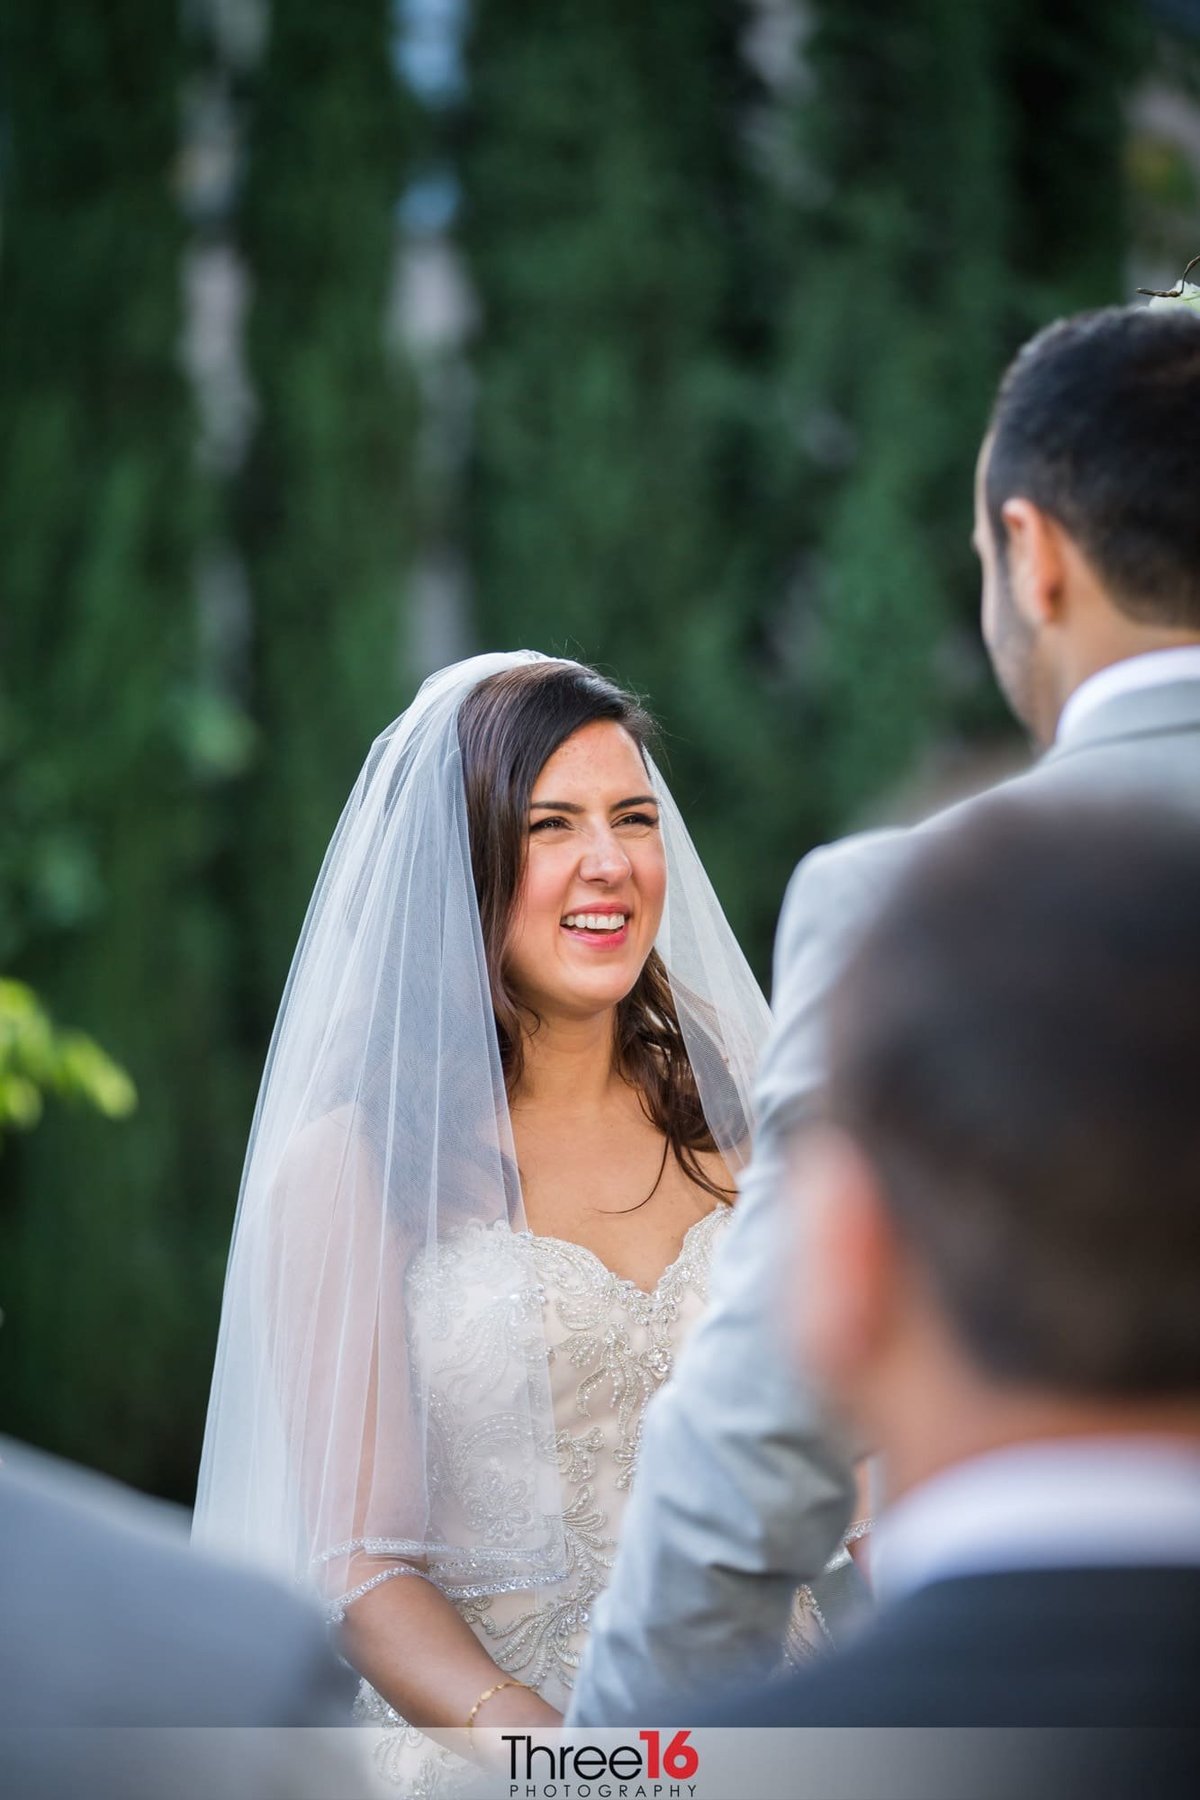 Bride smiles big at her Groom during the ceremony